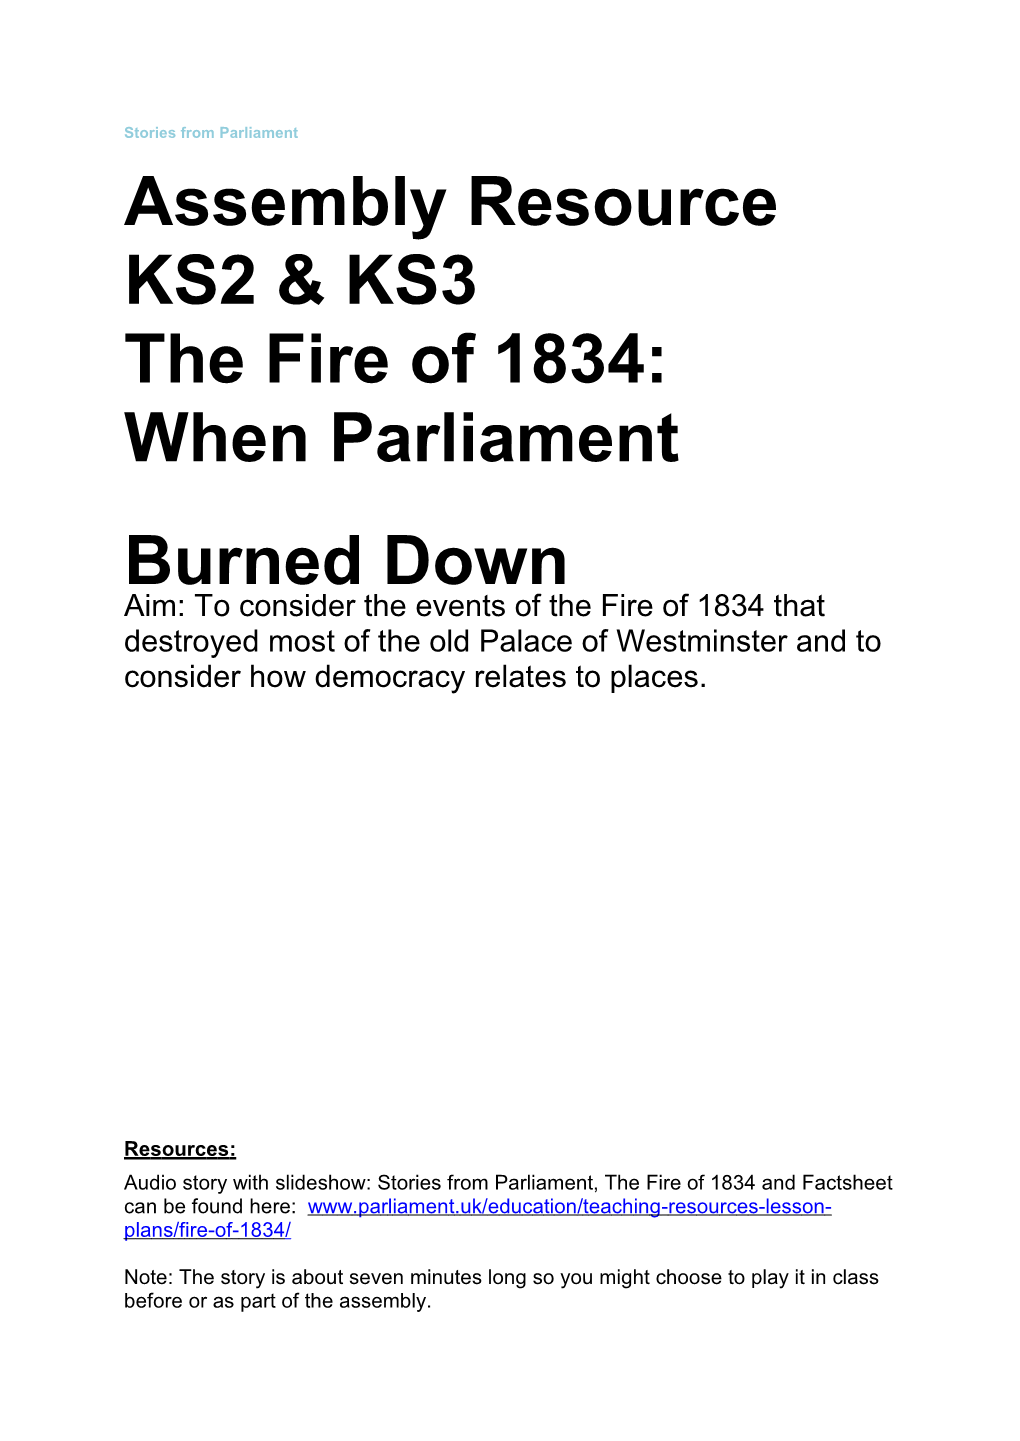 The Fire of 1834: When Parliament